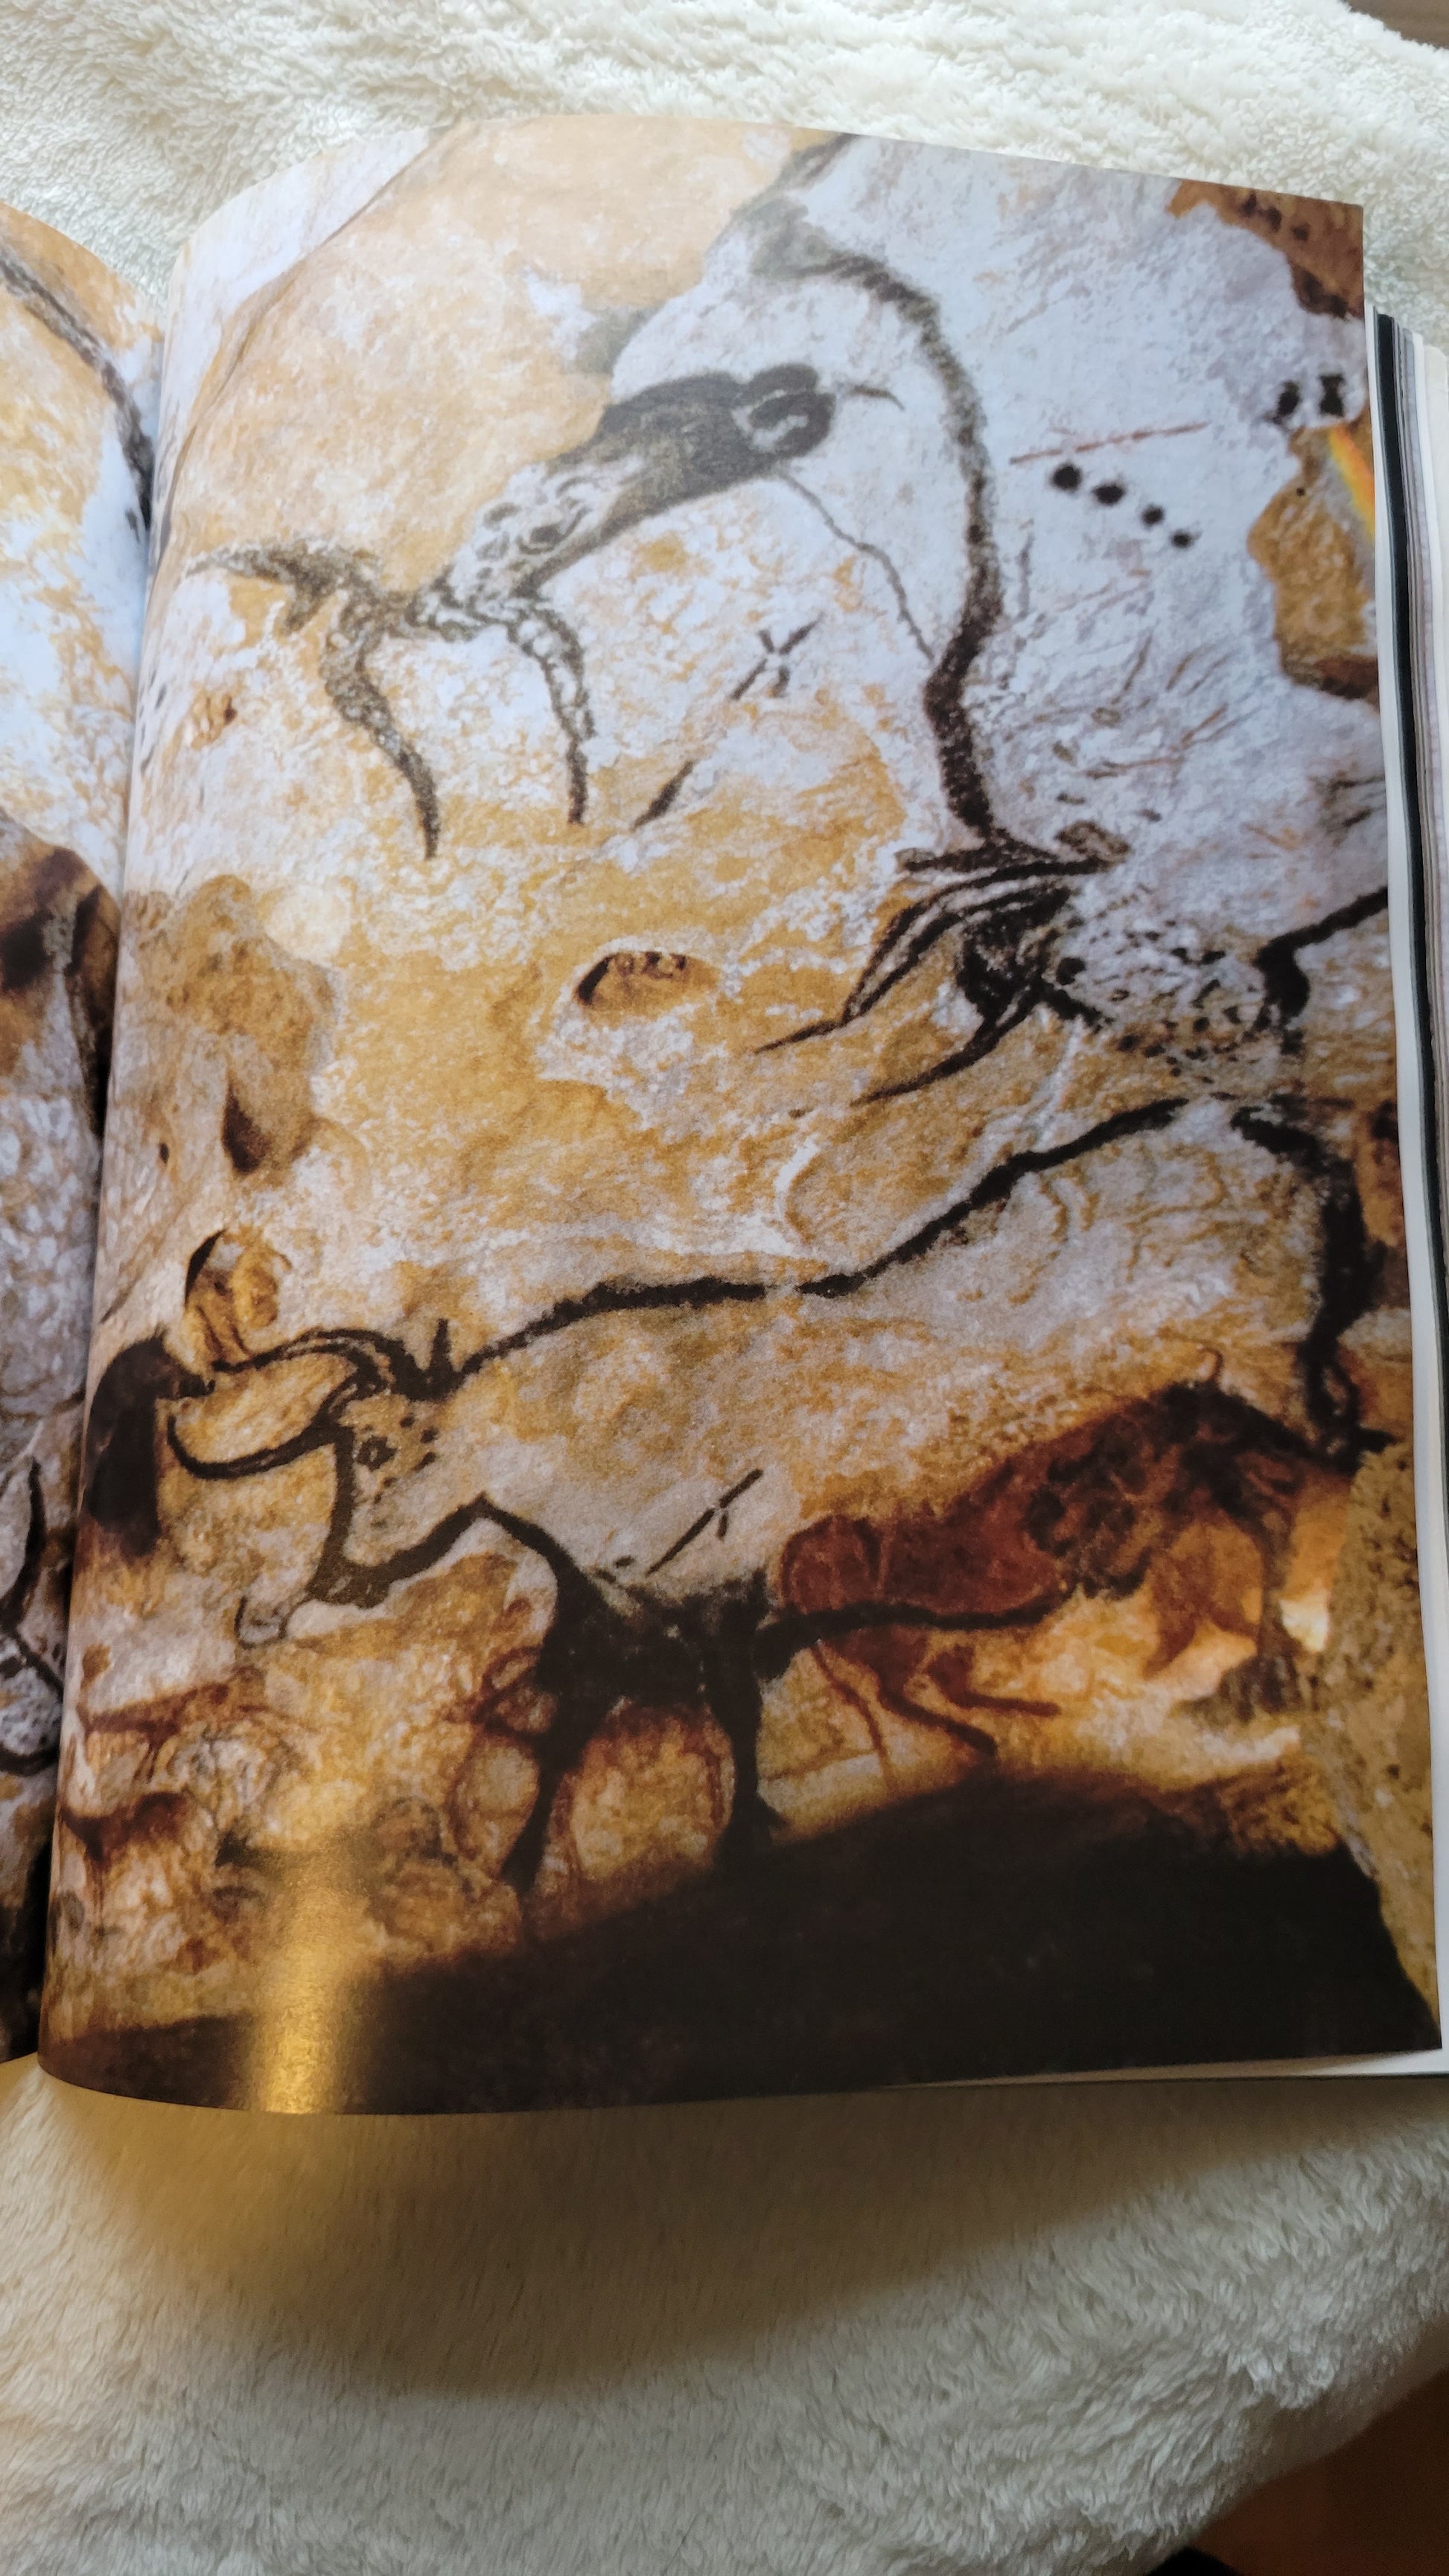 Used book for sale, "Prehistoric Art" was written by Dr. Jean-Pierre Mohen, published by Finest S.A. / Editions. View of photography of cave paintings.